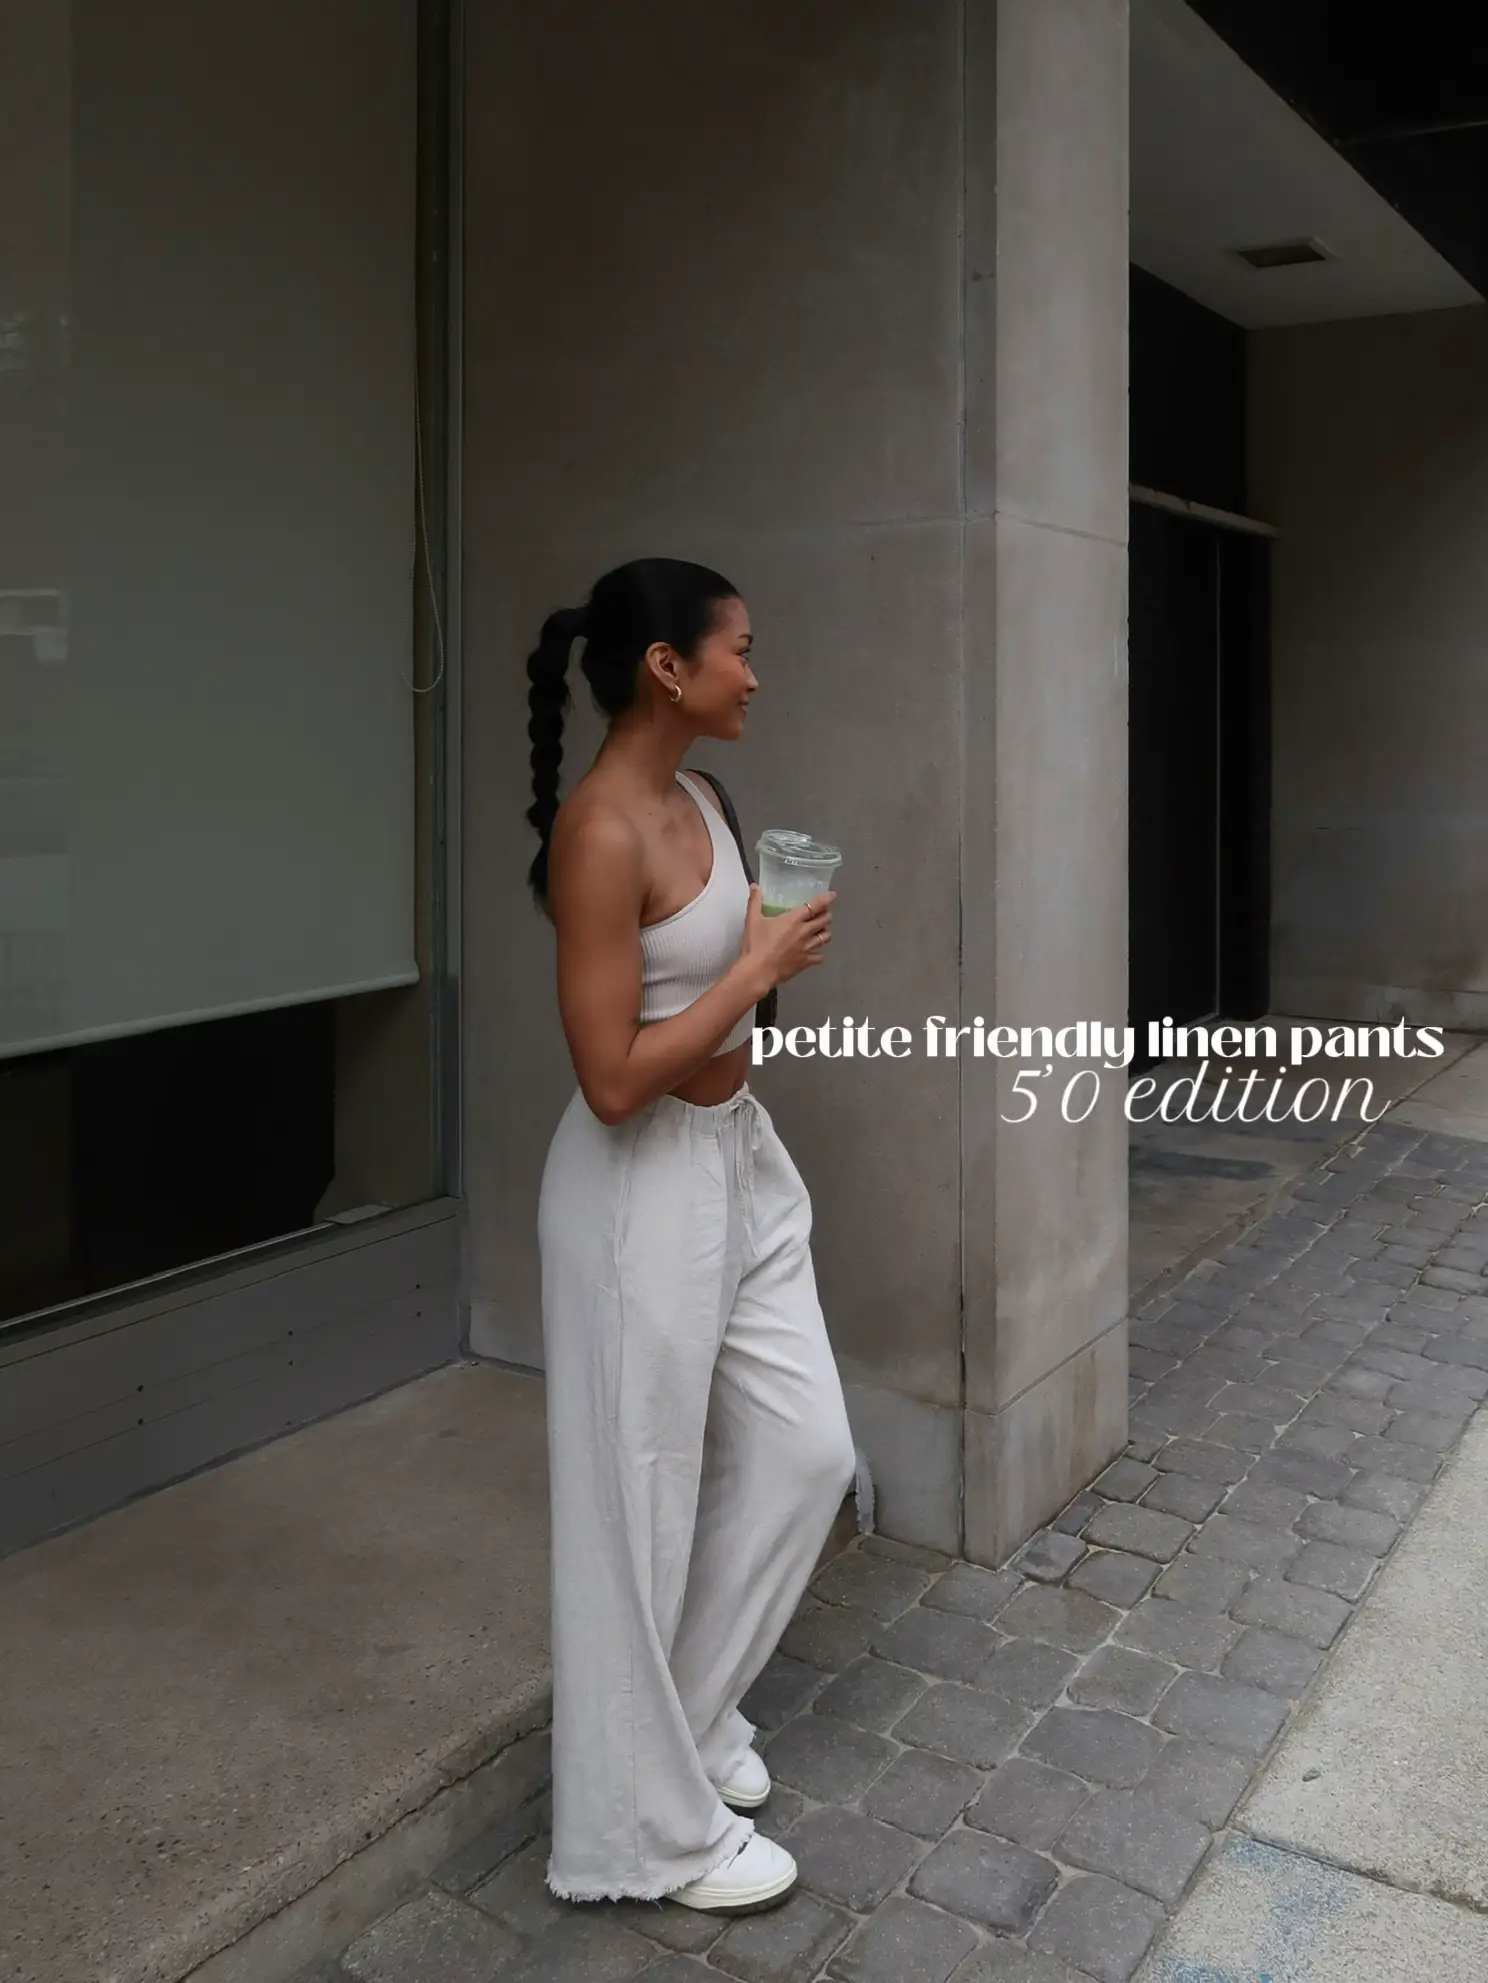 Lululemon scuba pants size guide 🖤, Gallery posted by Cait 🧚🏻‍♀️